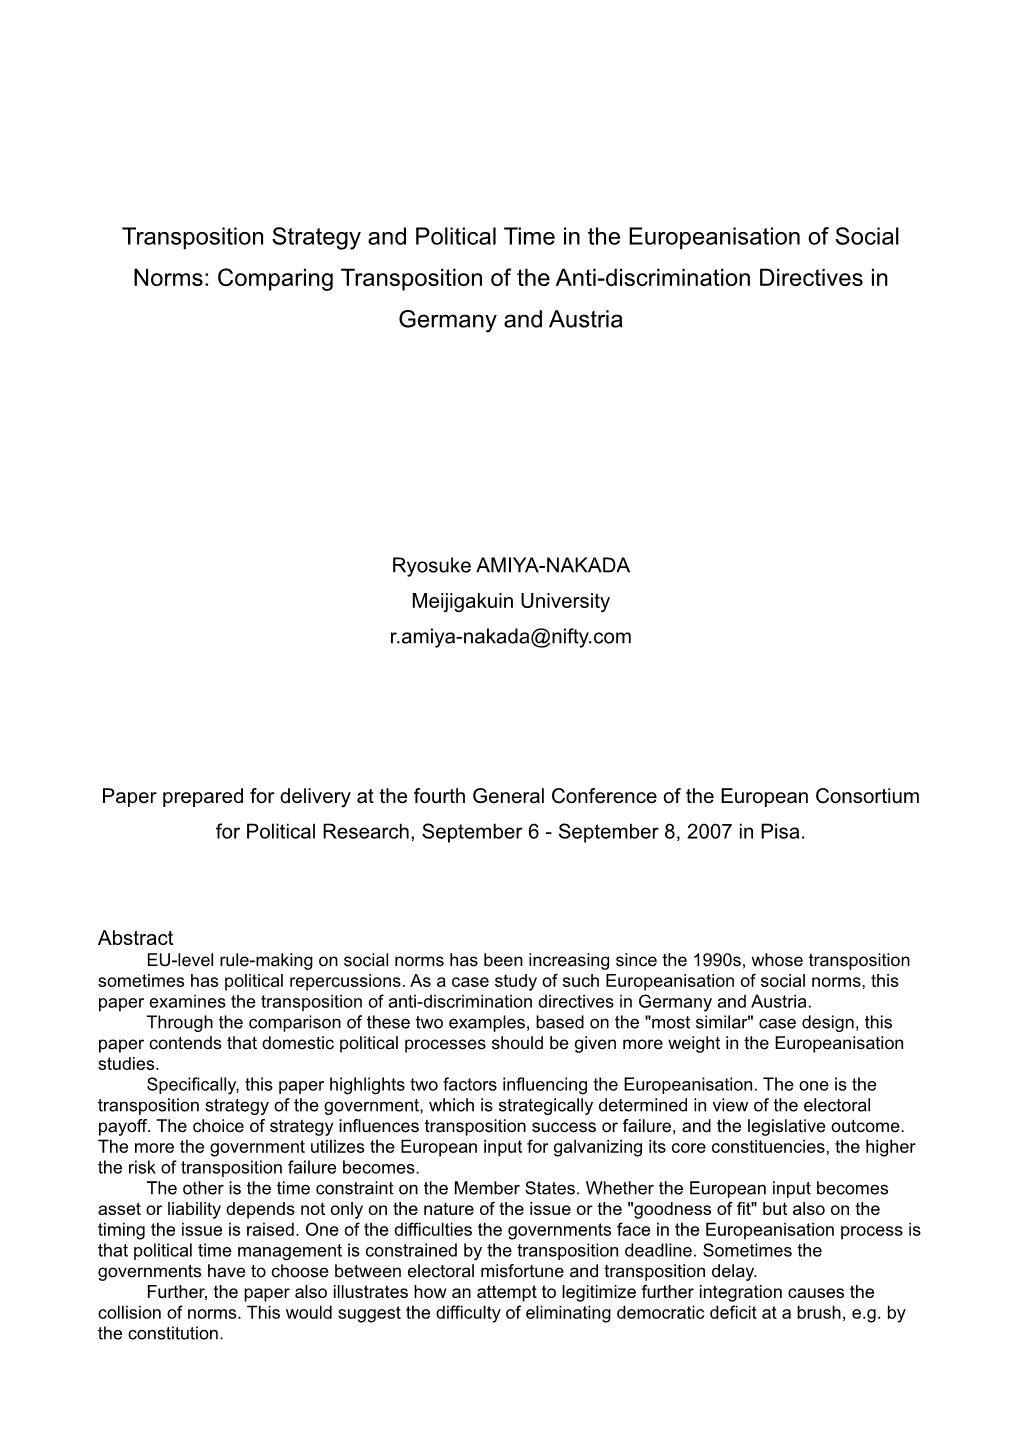 Transposition Strategy and Political Time in the Europeanisation of Social Norms: Comparing Transposition of the Anti-Discrimination Directives in Germany and Austria